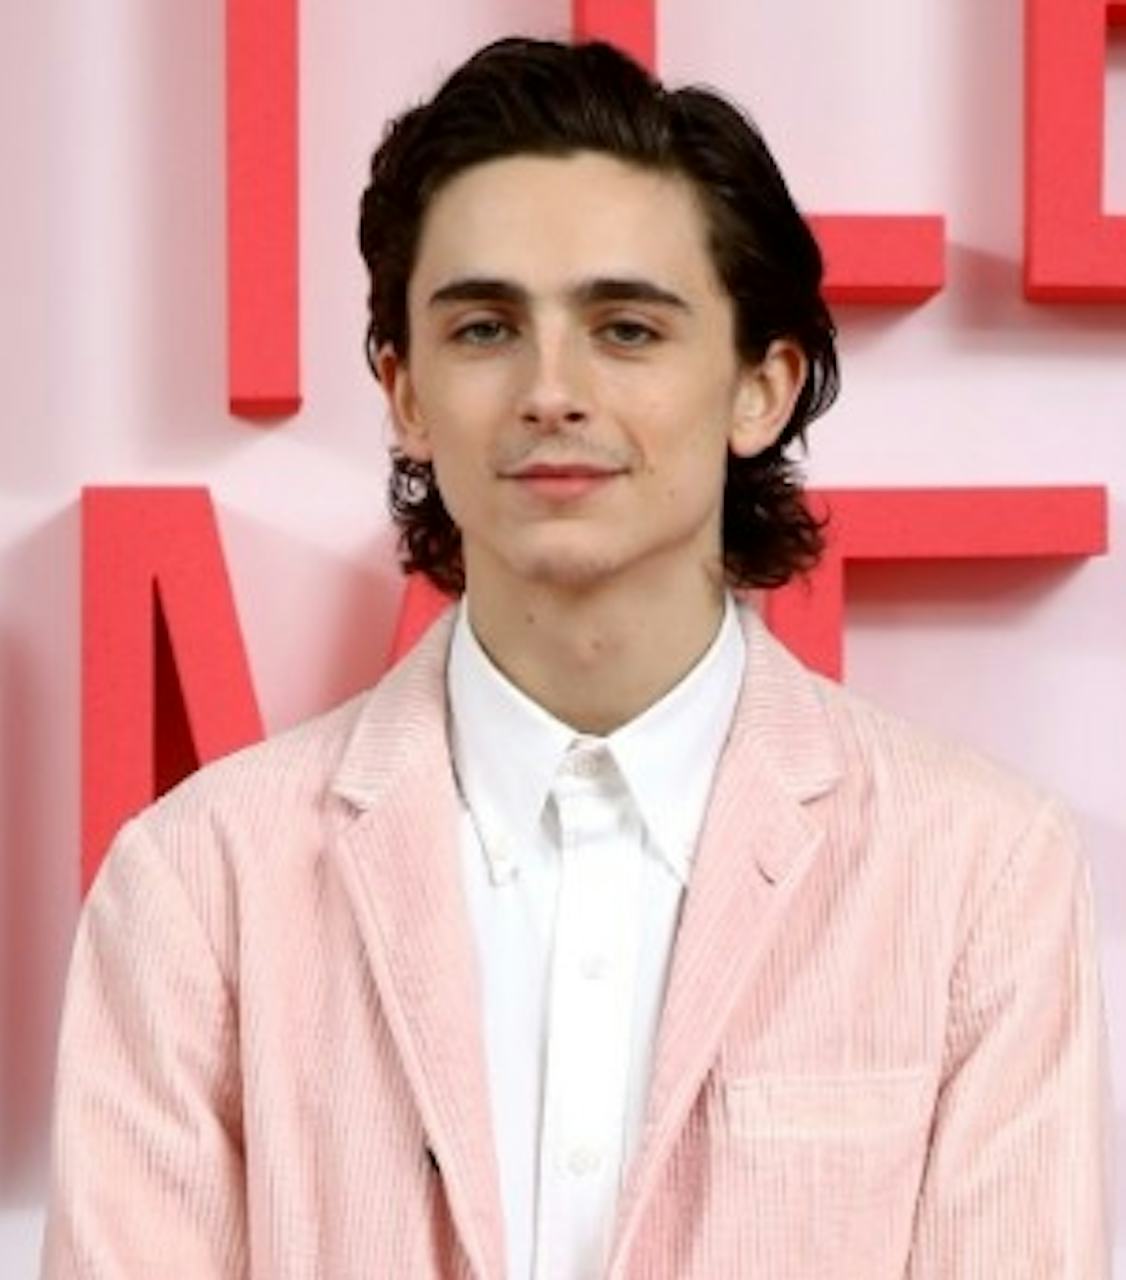 Timothee Chalamet Wore Pink Suit At 'Little Women' Photocall